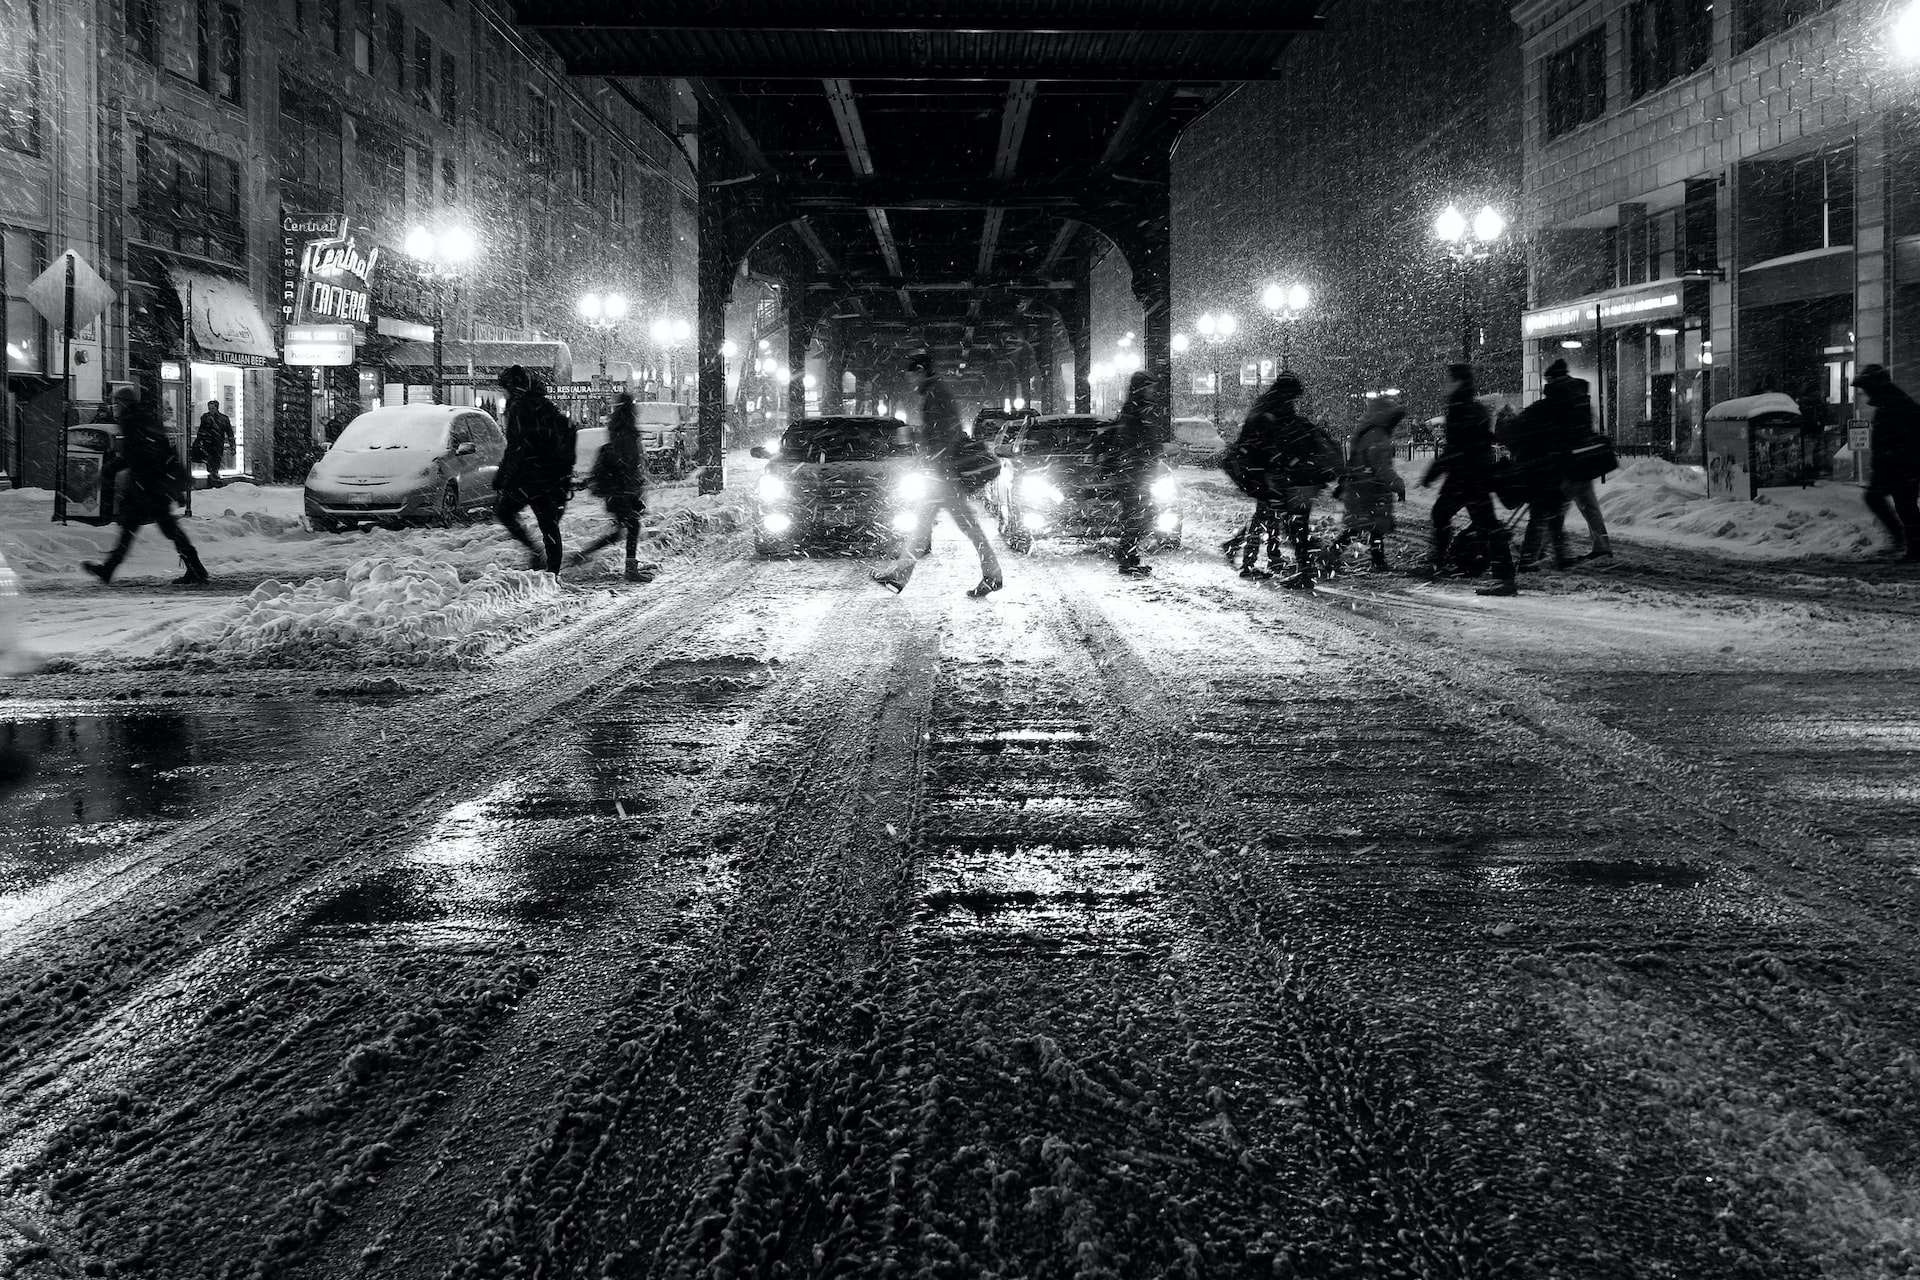 People trudge through snow and slush in Downtown Chicago